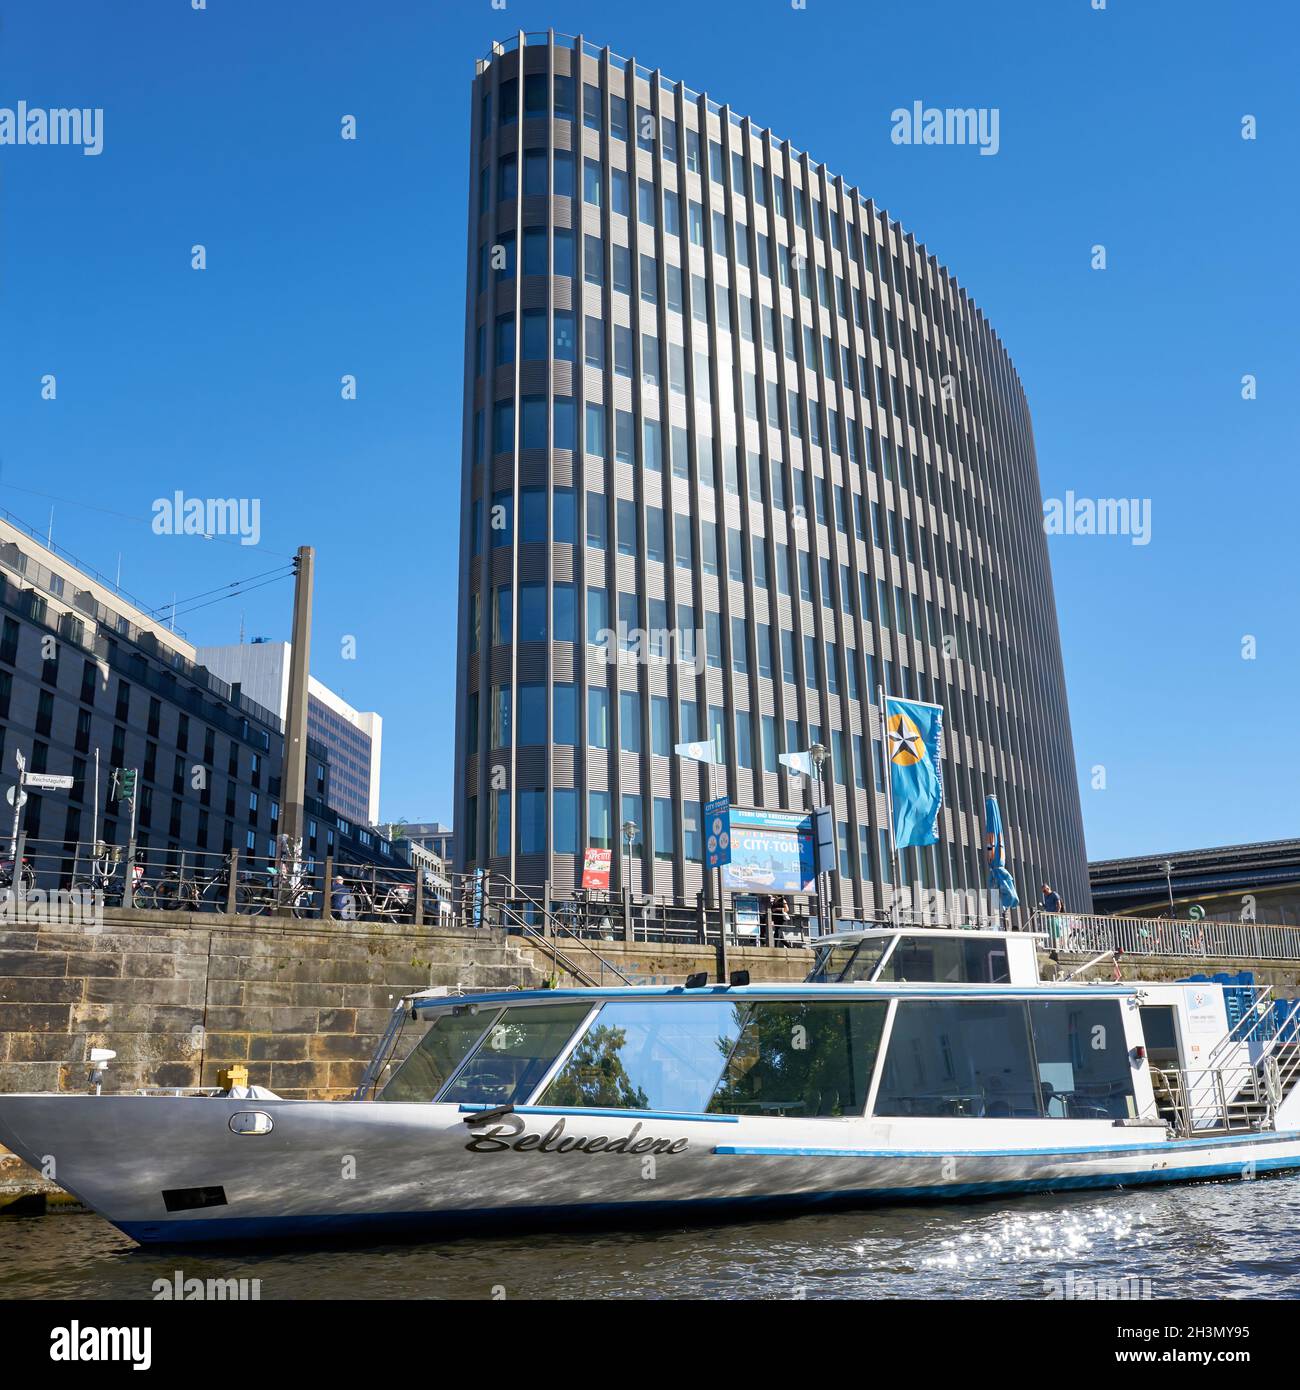 Excursion boat on the River Spree in Berlin. In the background the office building Spreedreieck Stock Photo